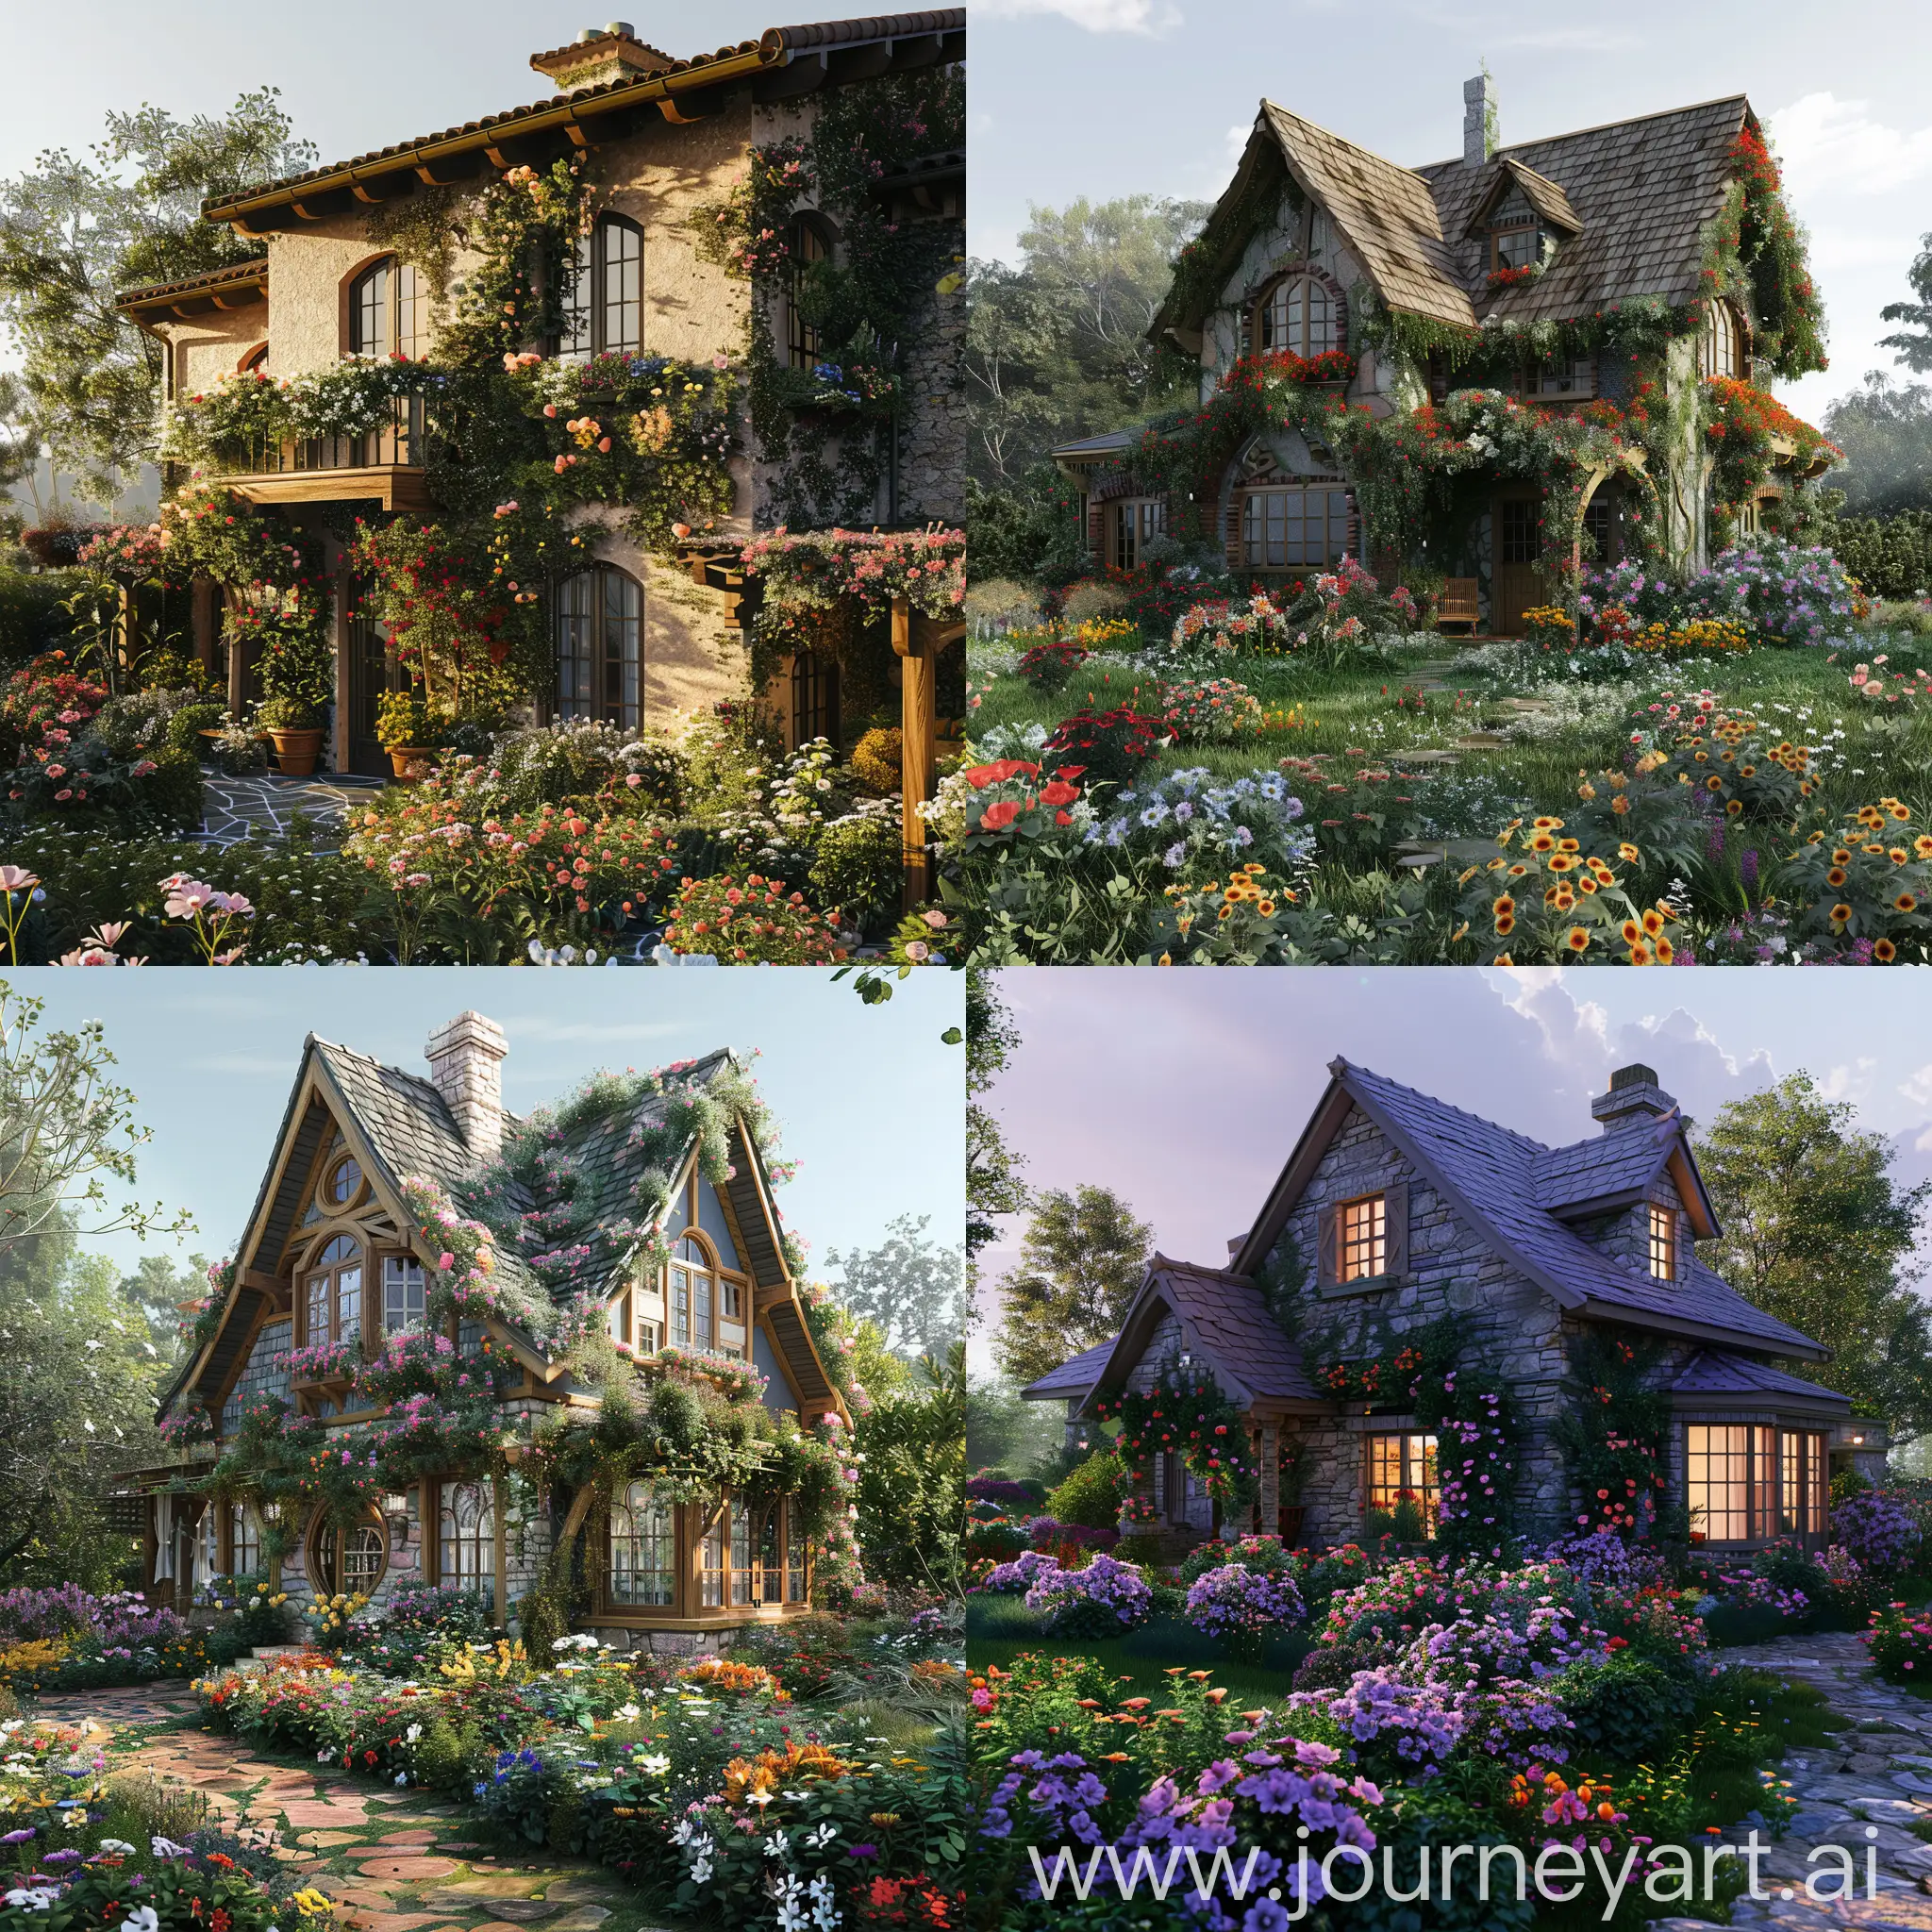 Idyllic-Country-House-Surrounded-by-Vibrant-Flowers